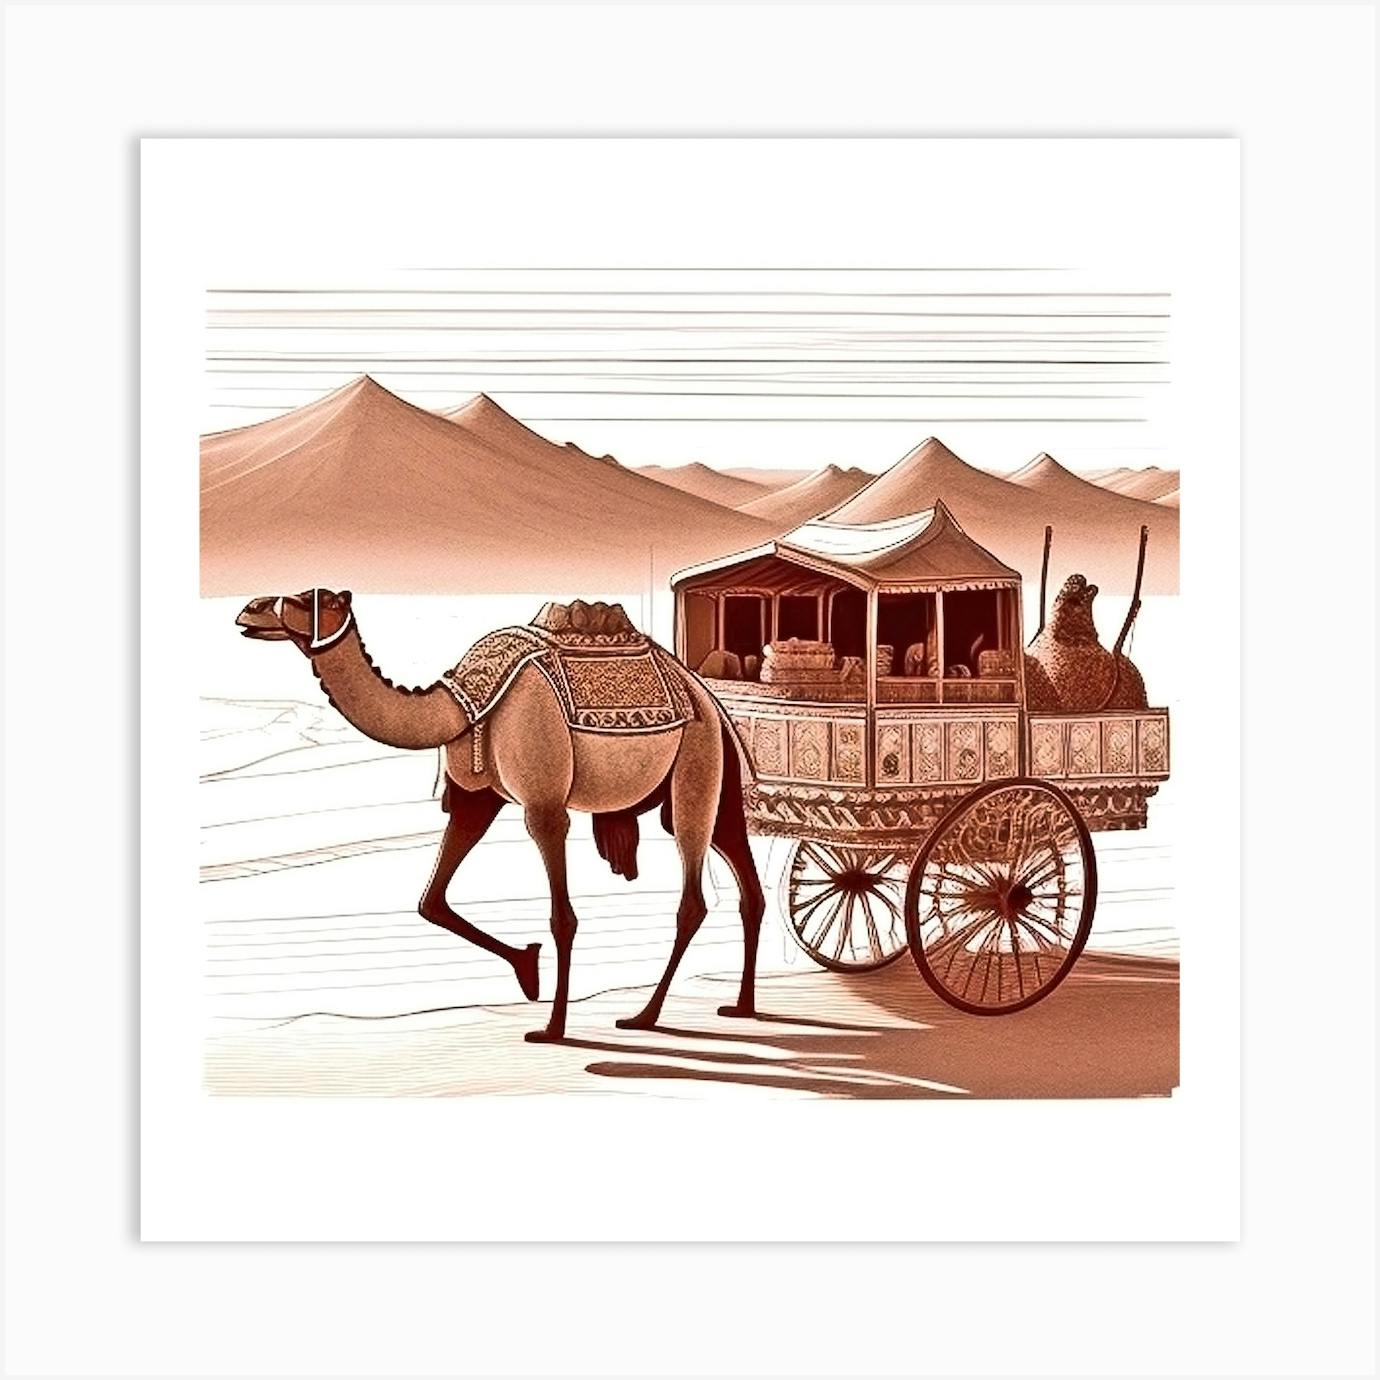 Villager on camel cart coloring page | Download Free Villager on camel cart  coloring page for kids | Best Coloring Pages